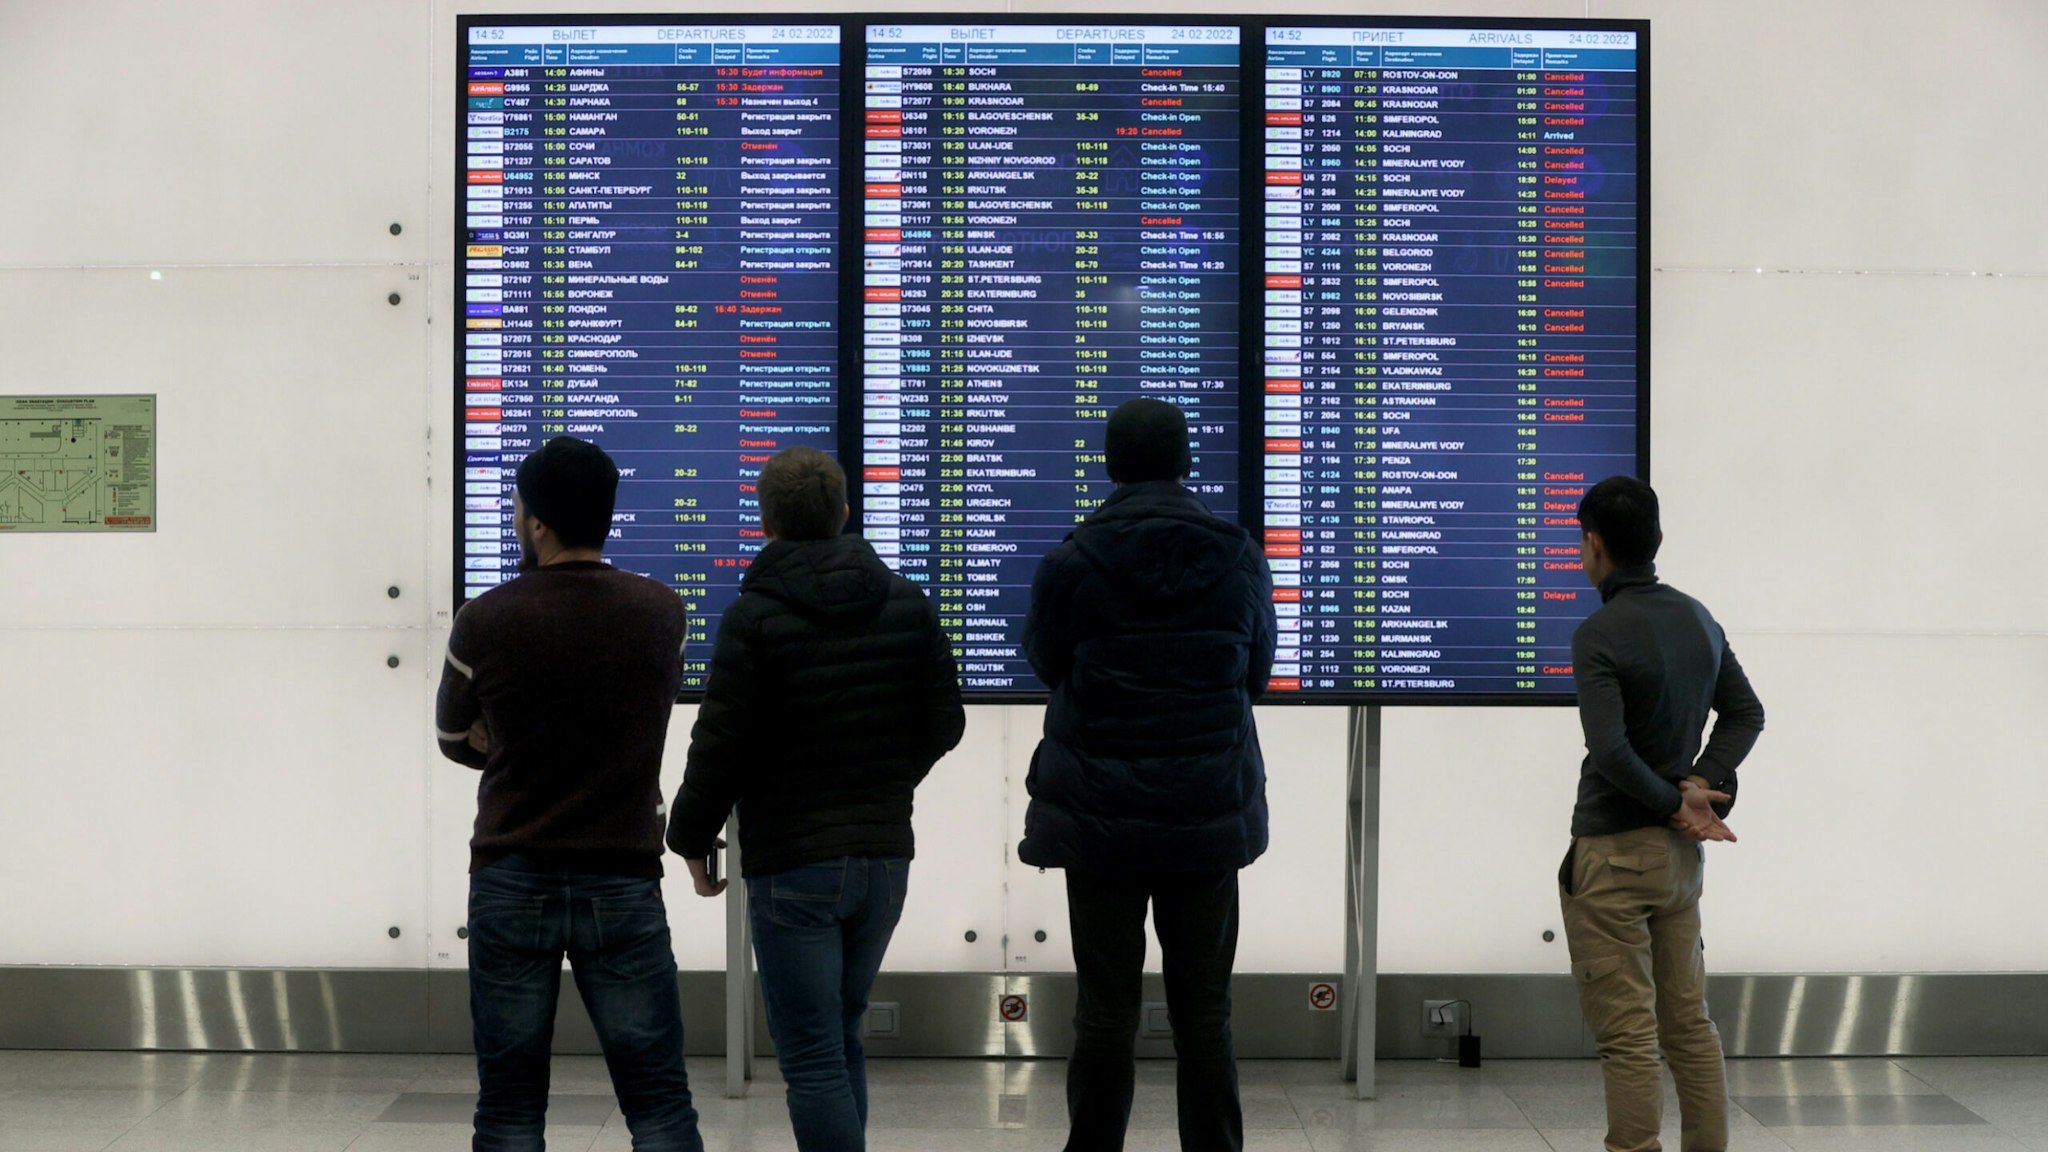 Passengers stand before a departures display board at Domodedovo International Airport.